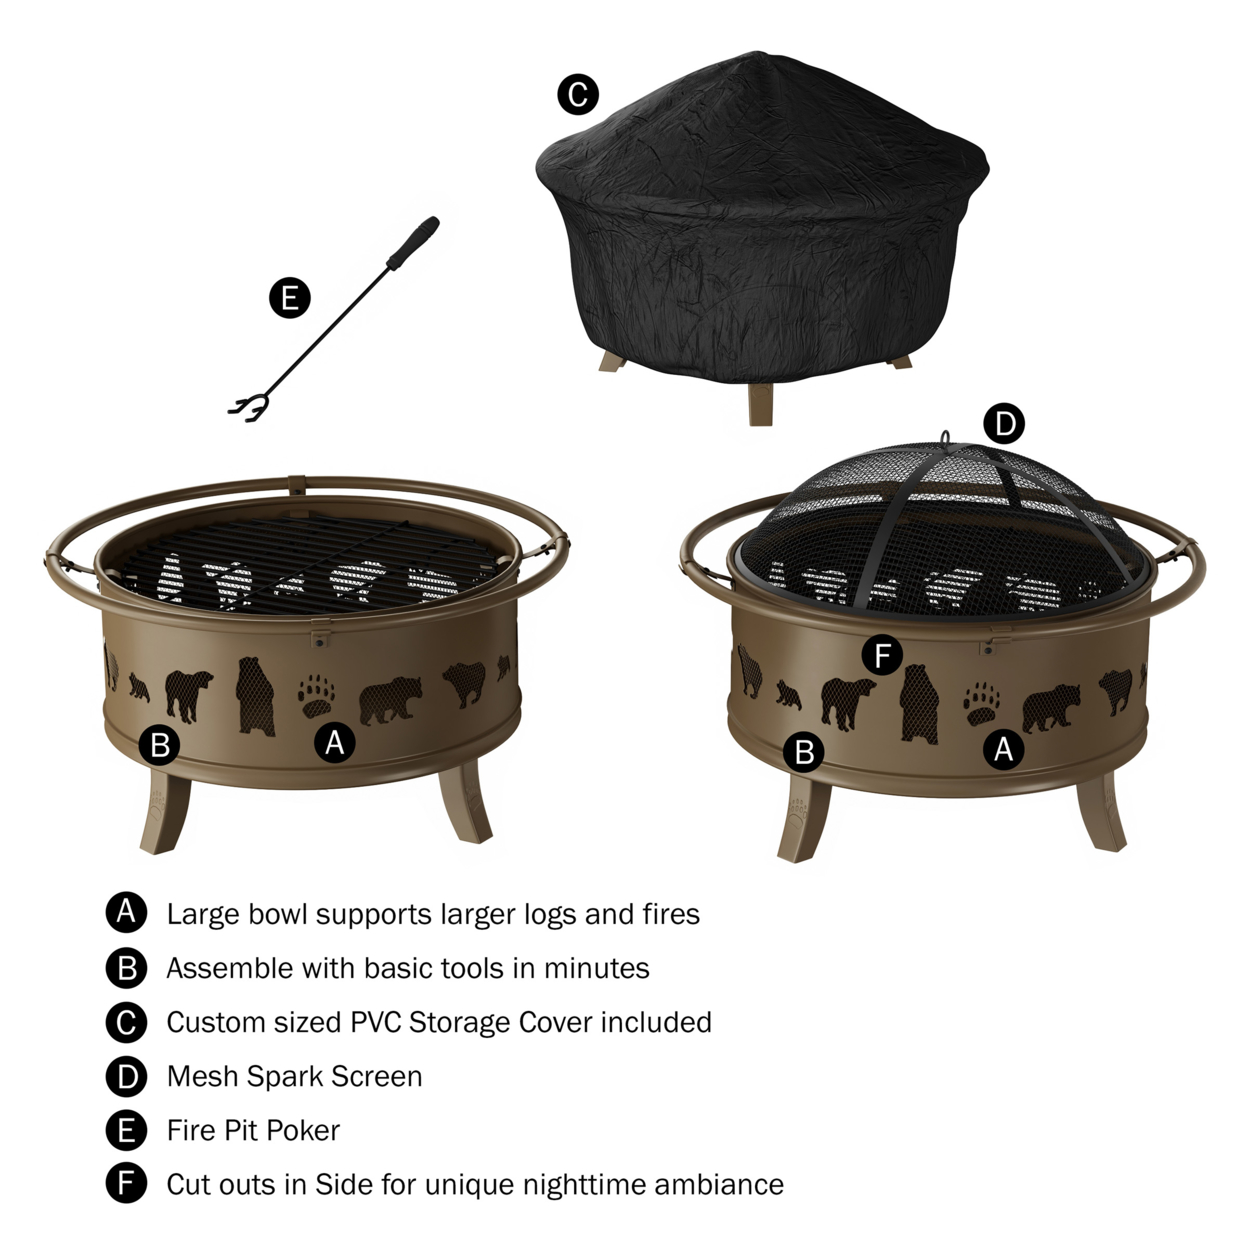 Outdoor Deep Fire Pit- Round Large Steel Bowl With Bear Cutouts, Mesh Spark Screen, Log Poker & Storage Cover